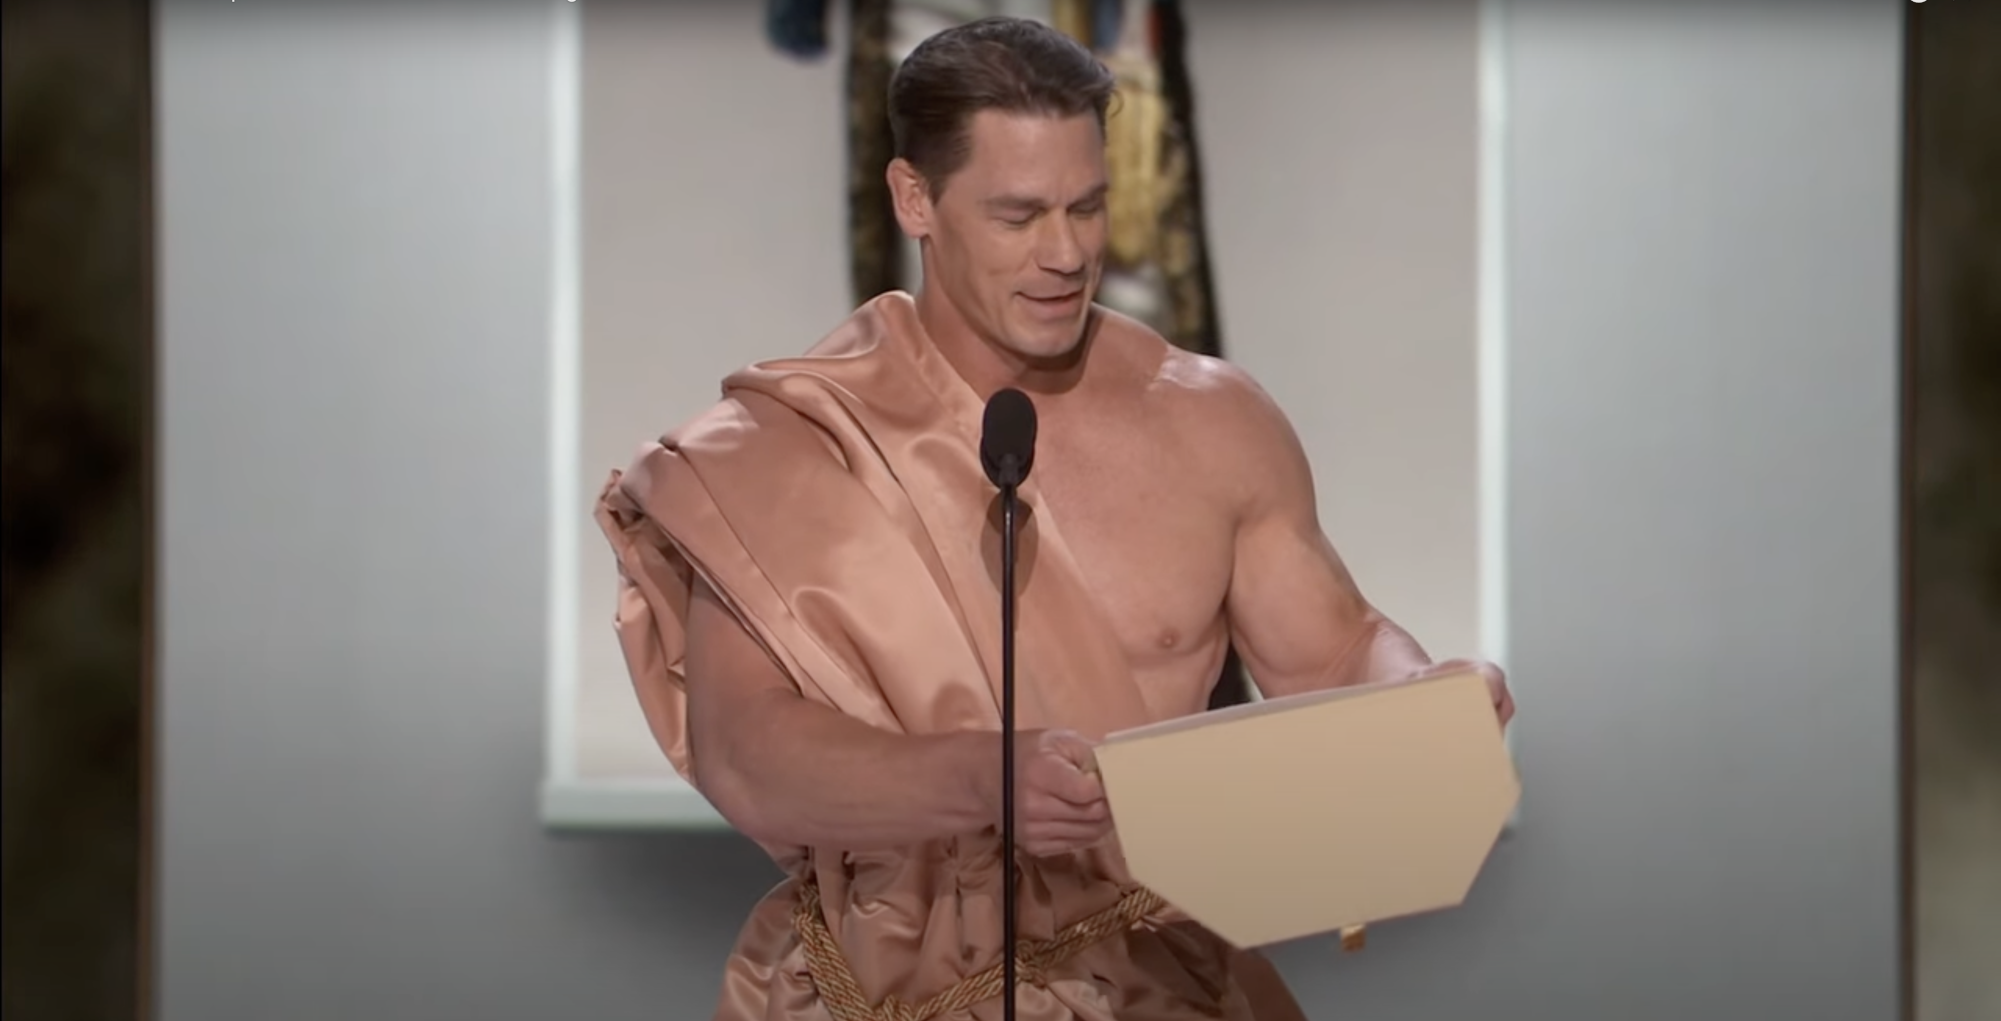 John Cena walked out onstage naked before donning a toga to present the award for Best in Costume Design.